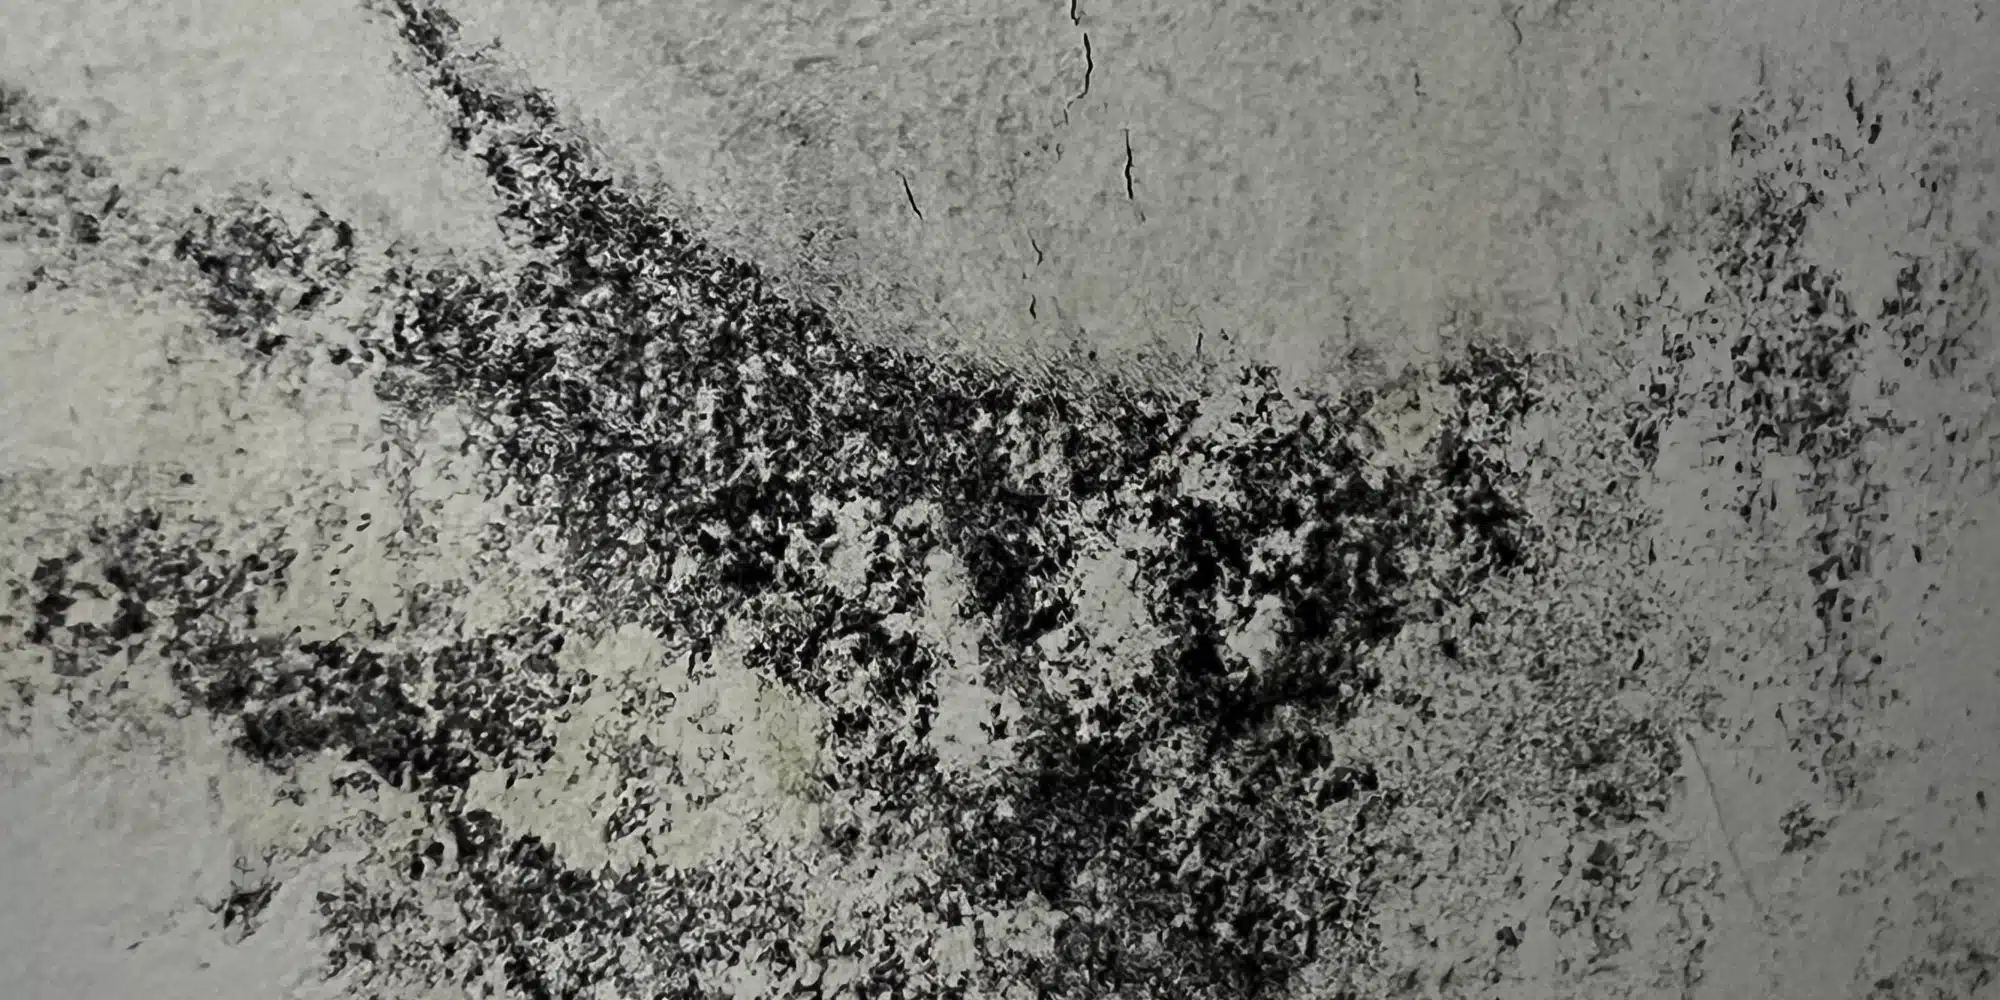 Close-up view of a wall surface covered in patchy black mold, showcasing various stages of growth and infestation across the texture